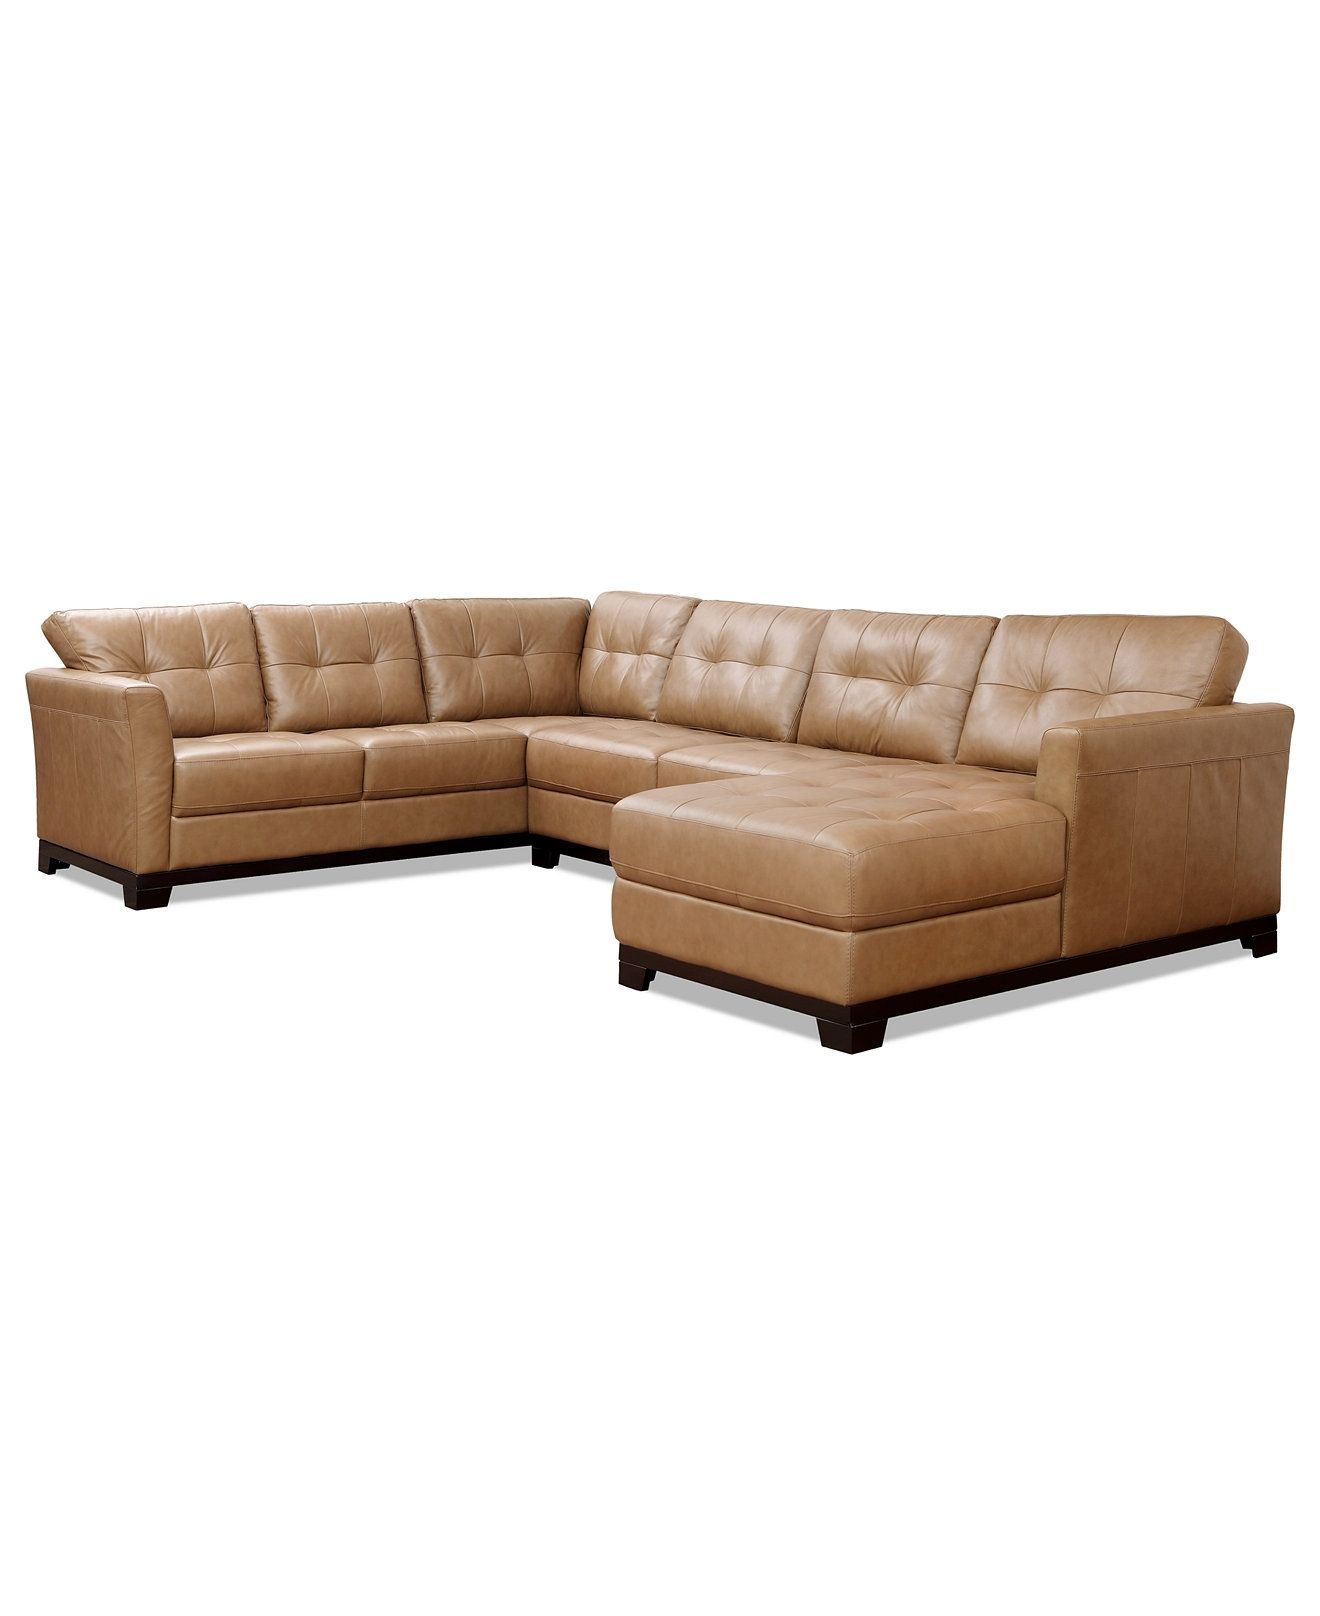 Martino Leather 3 Piece Chaise Sectional Sofa – Couches & Sofas In Macys Leather Sectional Sofas (View 1 of 10)